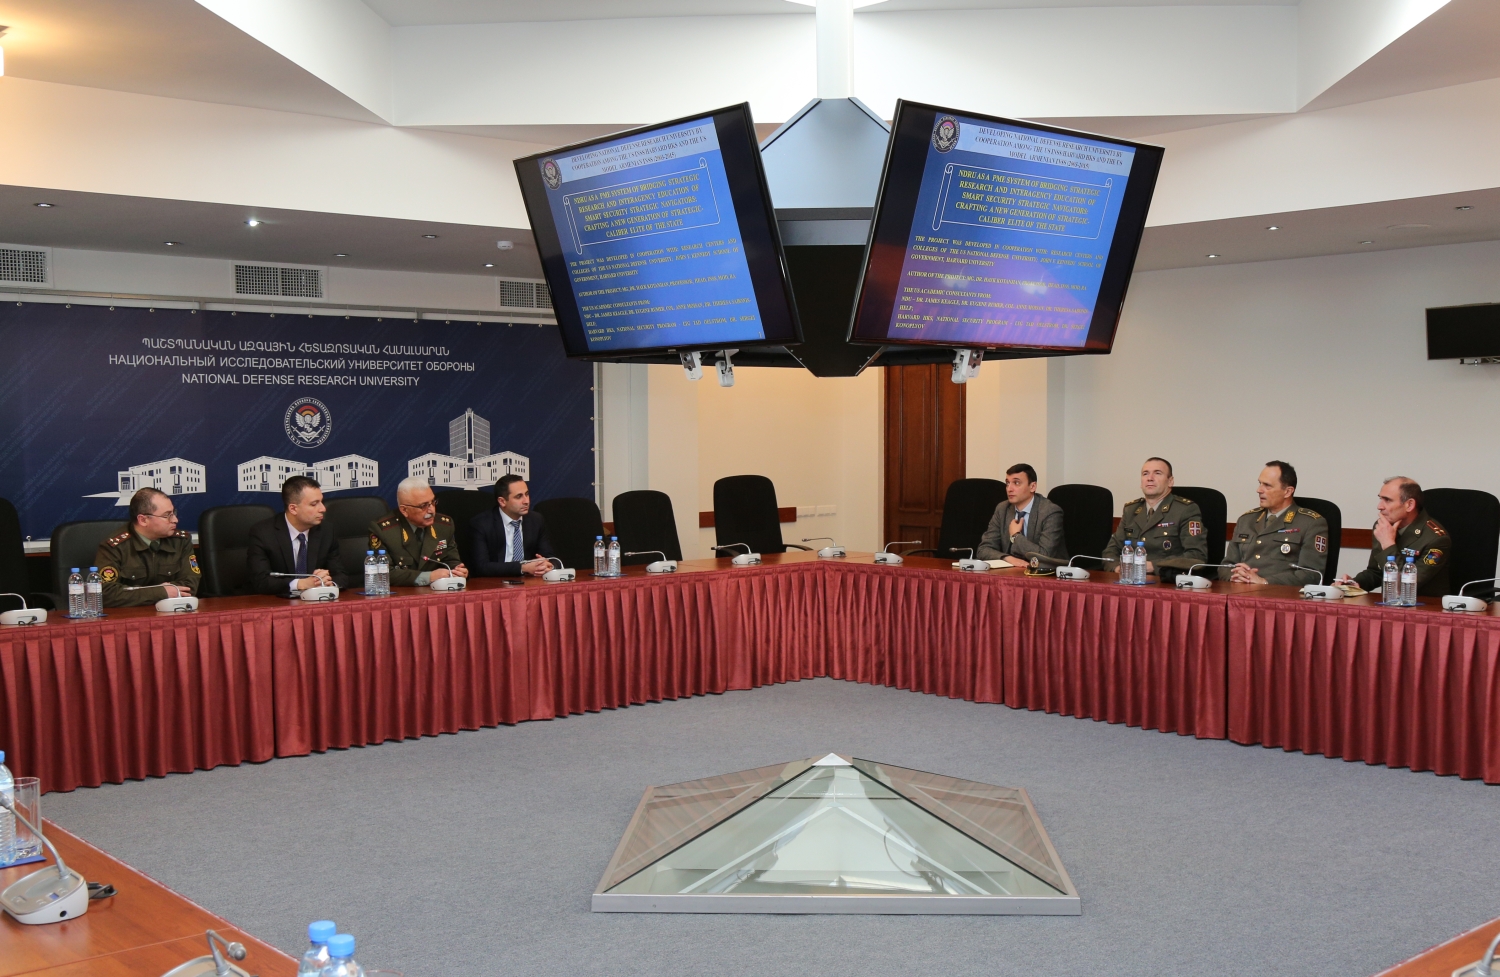 The Delegation of the University of Defense of the Republic of Serbia visits the National Defense Research University, MoD, RA